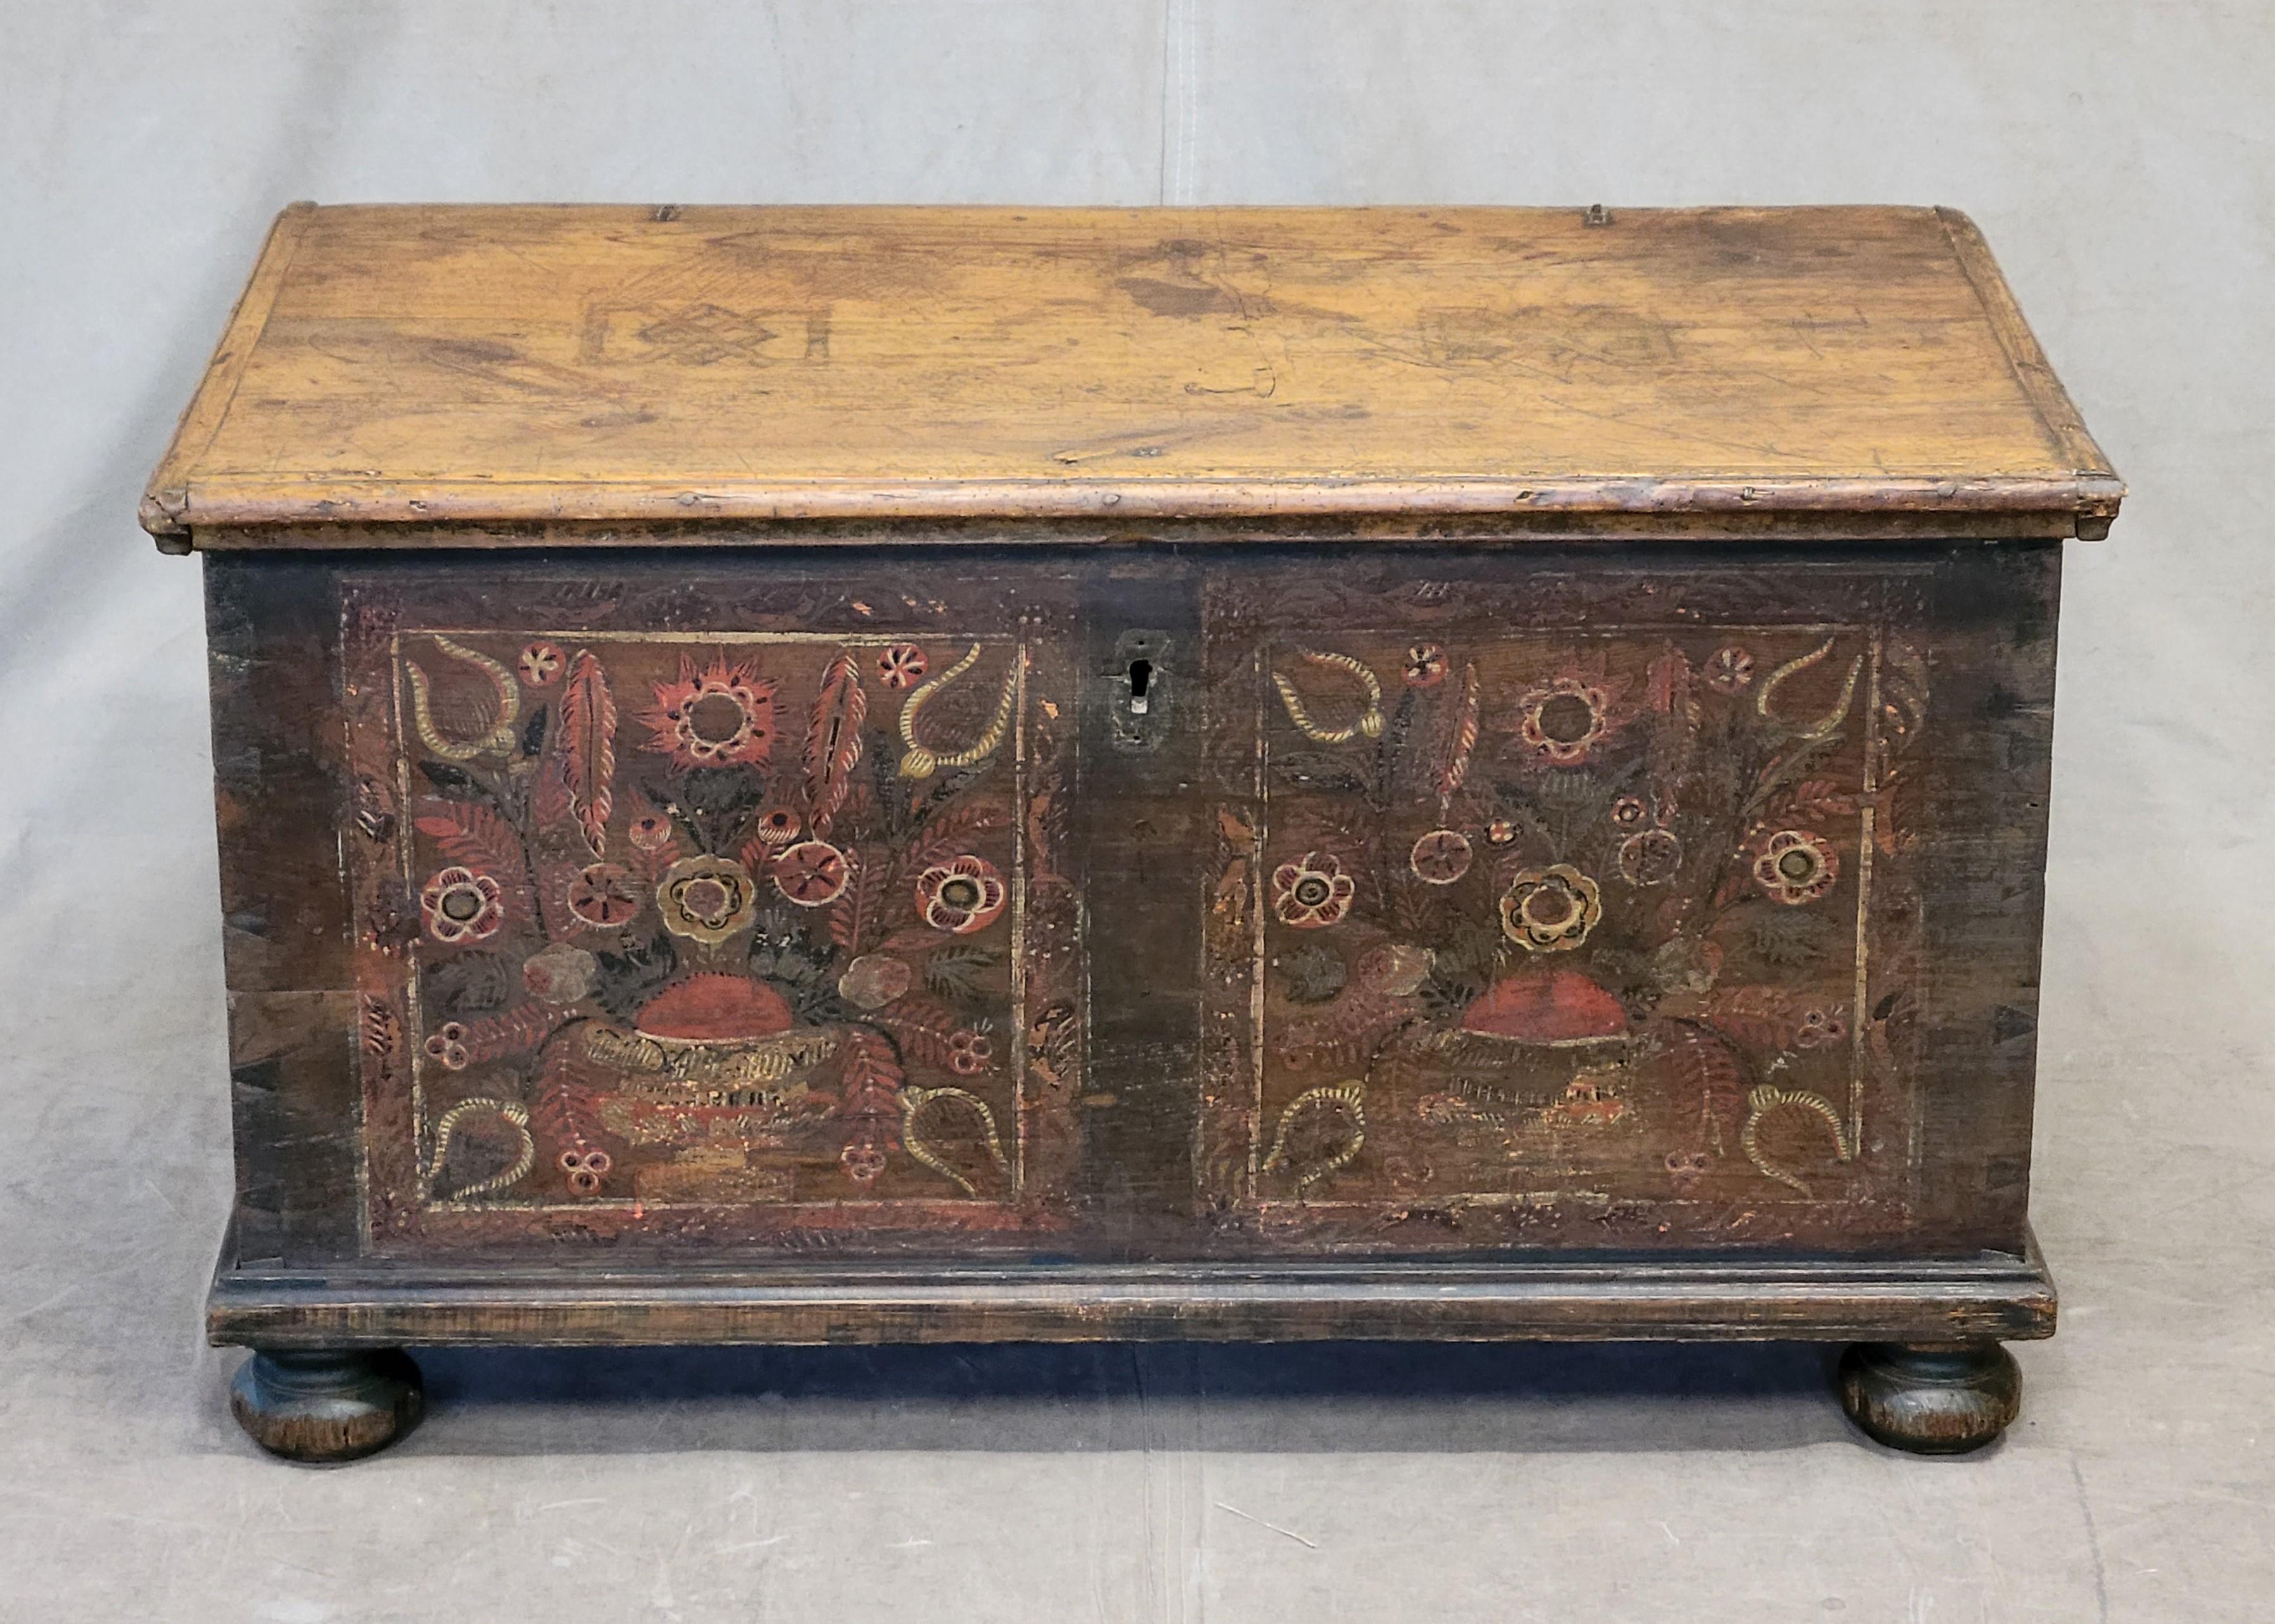 A gorgeous, antique late 1800s rustic Romanian painted pine blanket chest. Perfect as a coffee table, accent piece in a bedroom, or even use as a bench in an entryway.
Condition commensurate with age and use. Paint is abraded, particularly on one